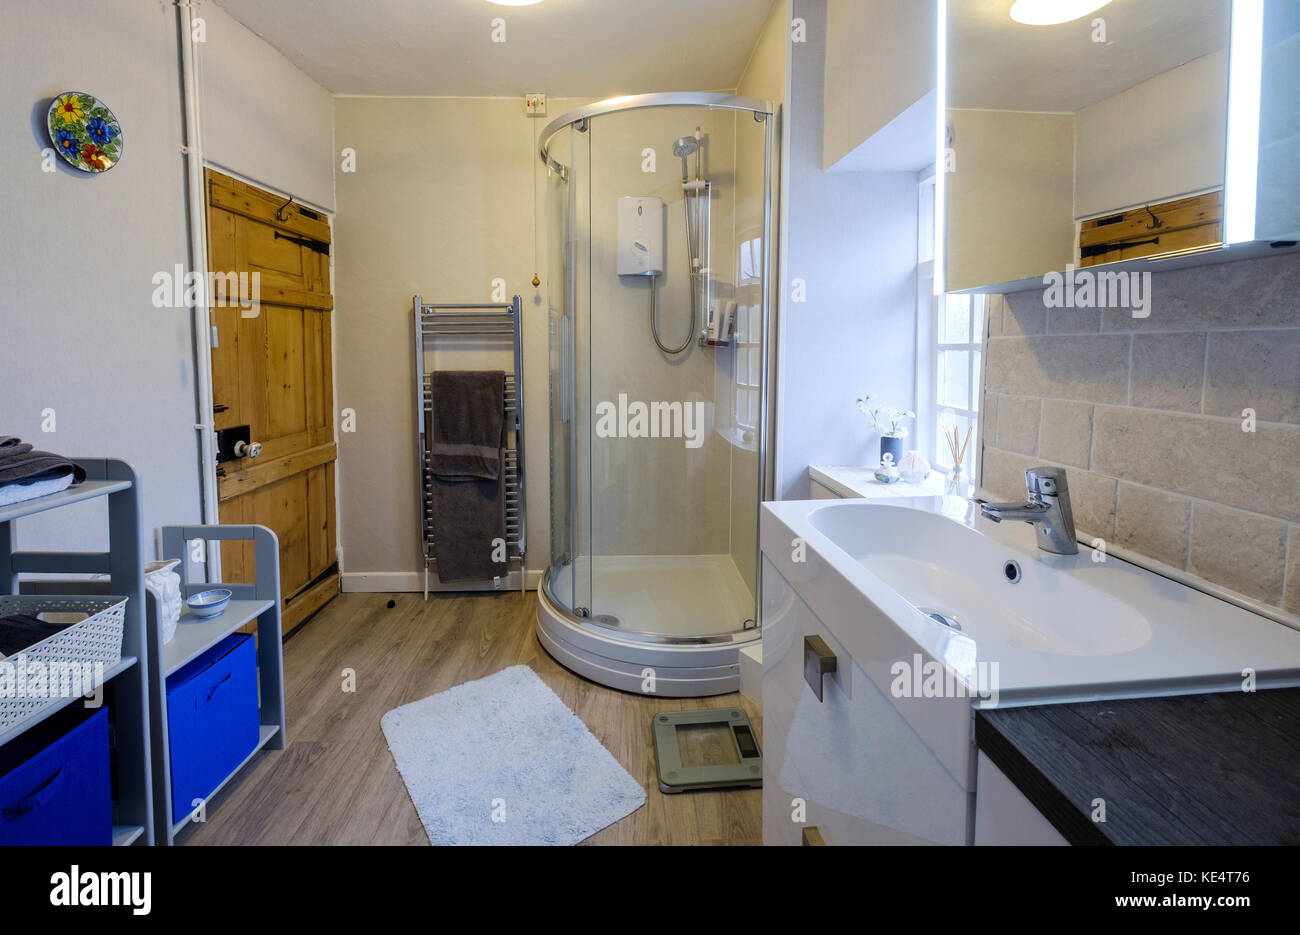 NEW BATHROOM IN OLD COTTAGE. Stock Photo